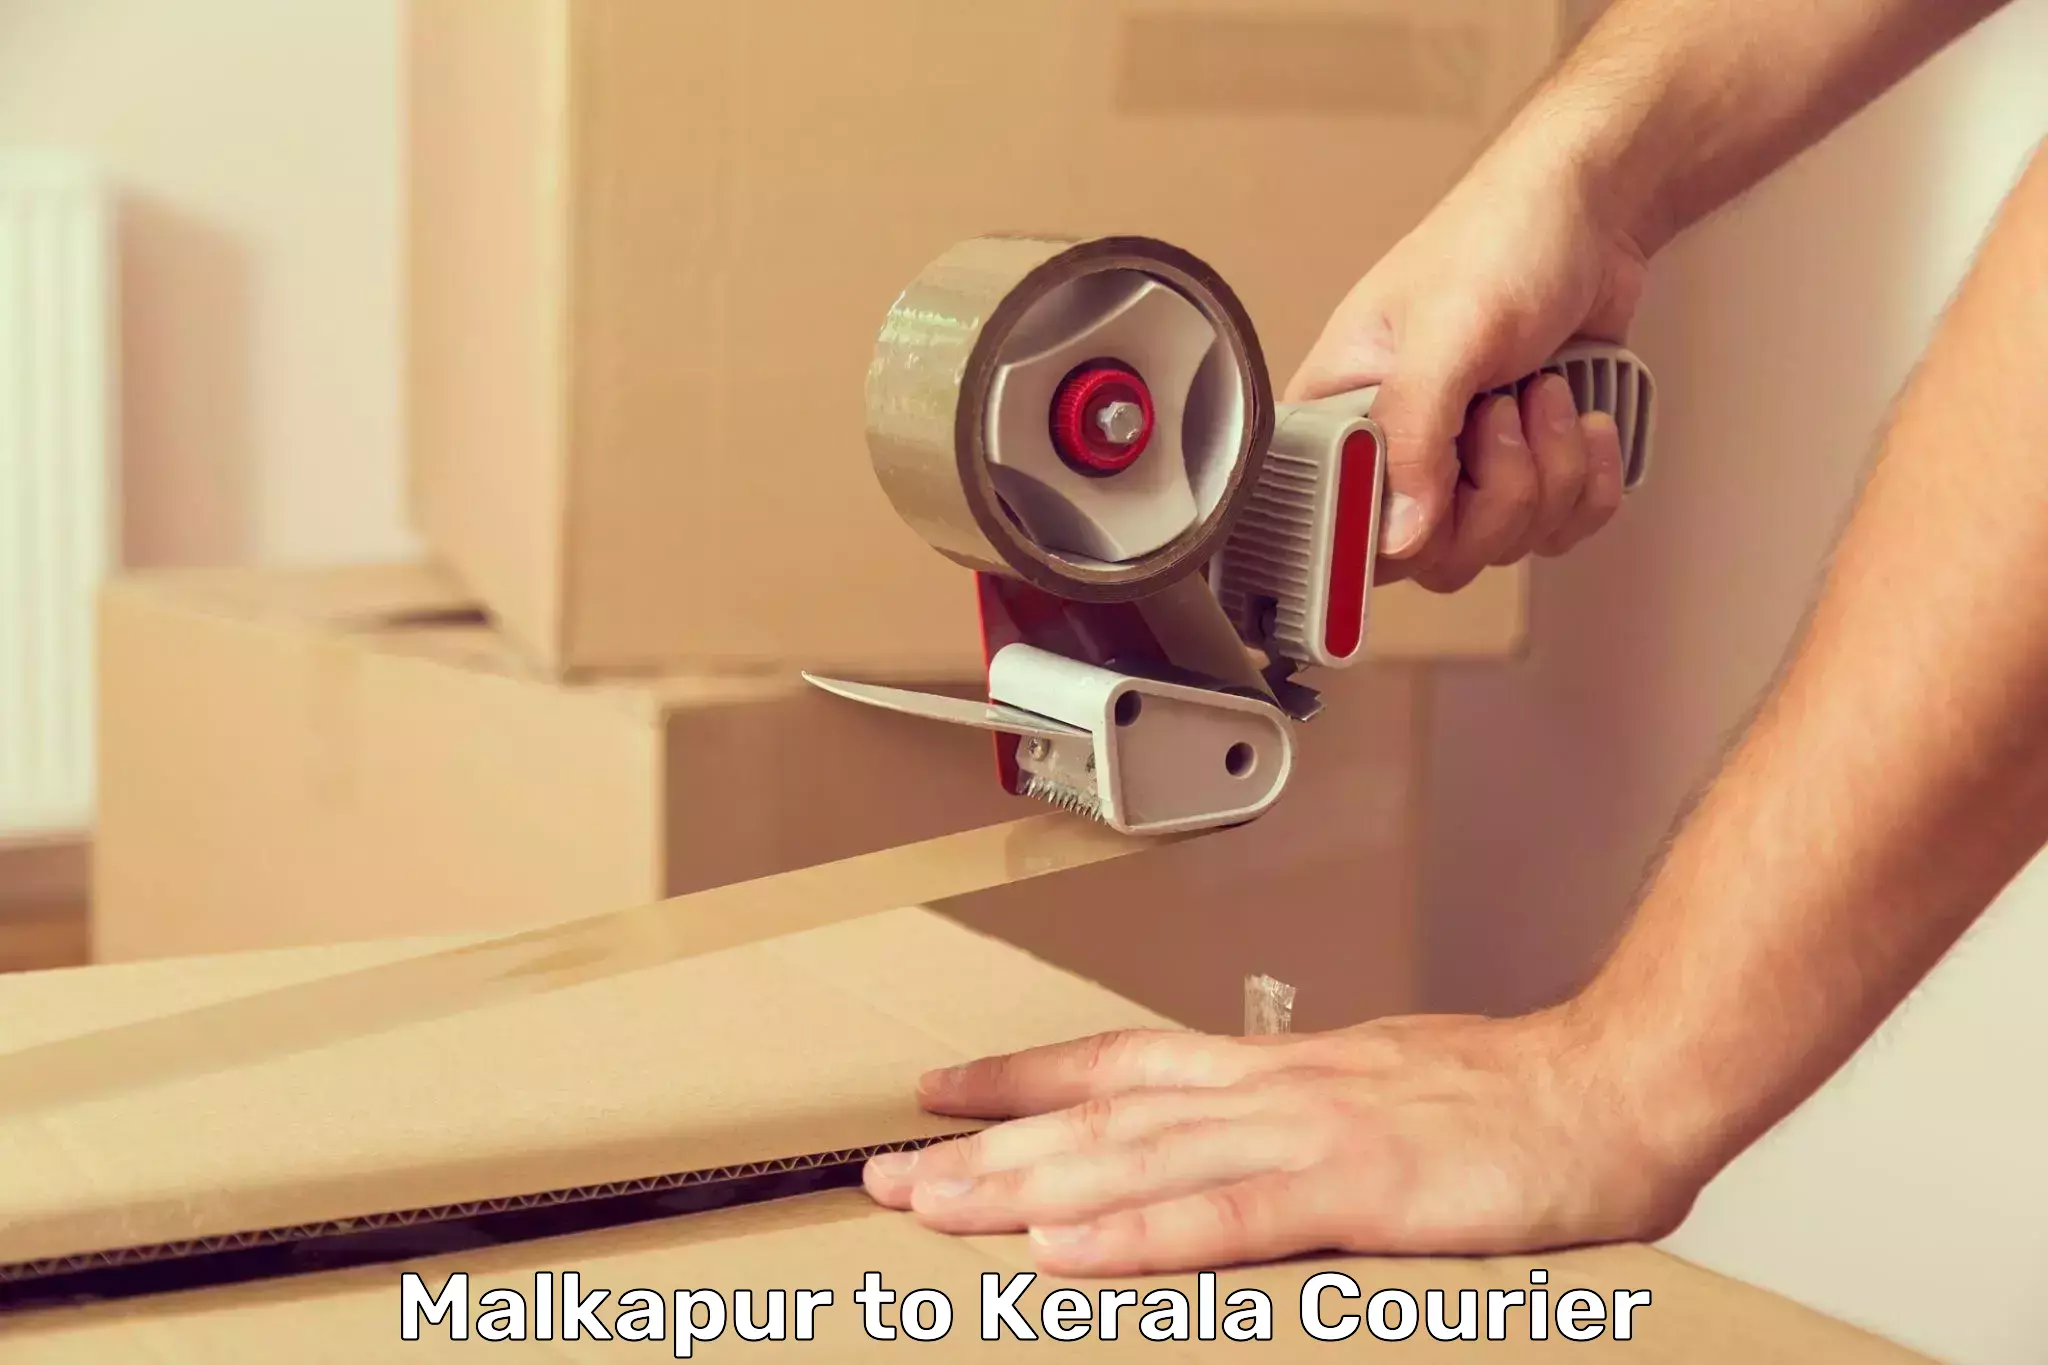 Next-day delivery options Malkapur to Kerala